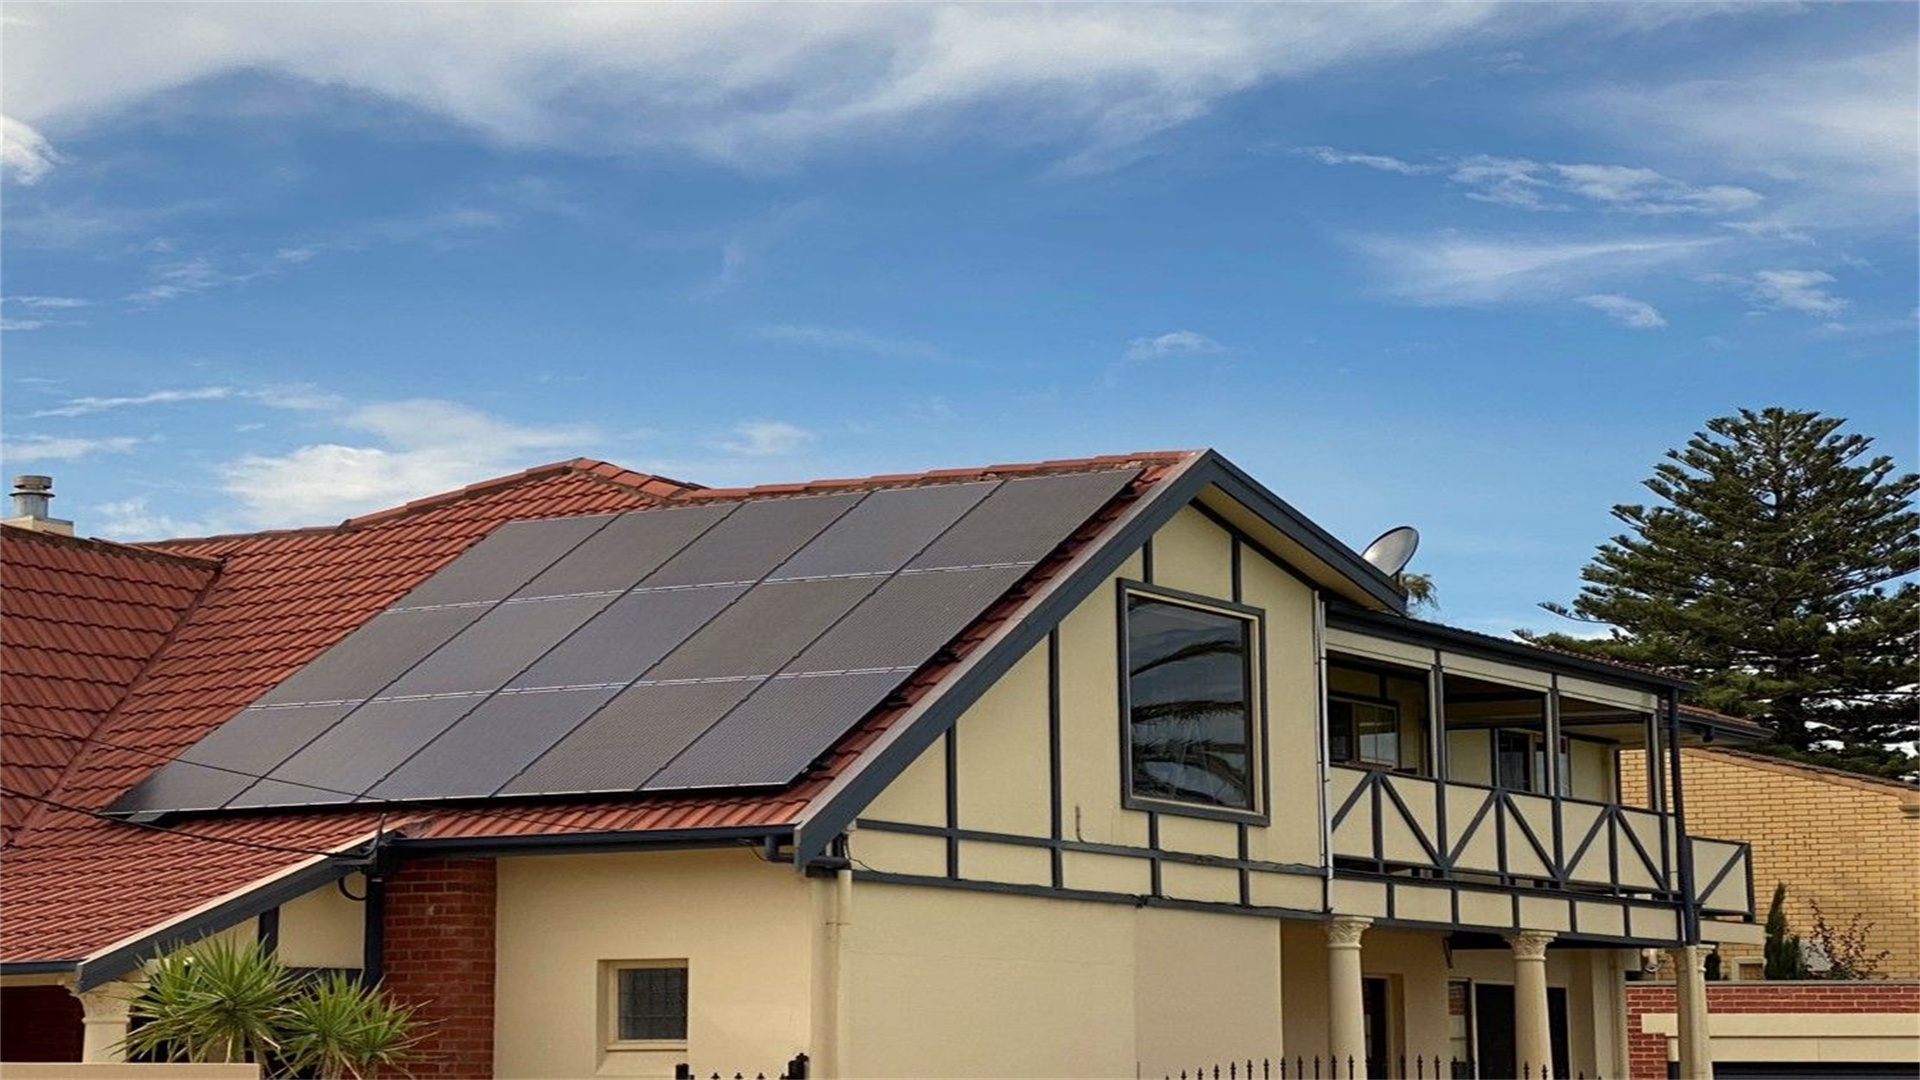 Adelaide, Australia - 9.9KW Household Distributed Rooftop Power Generation Project